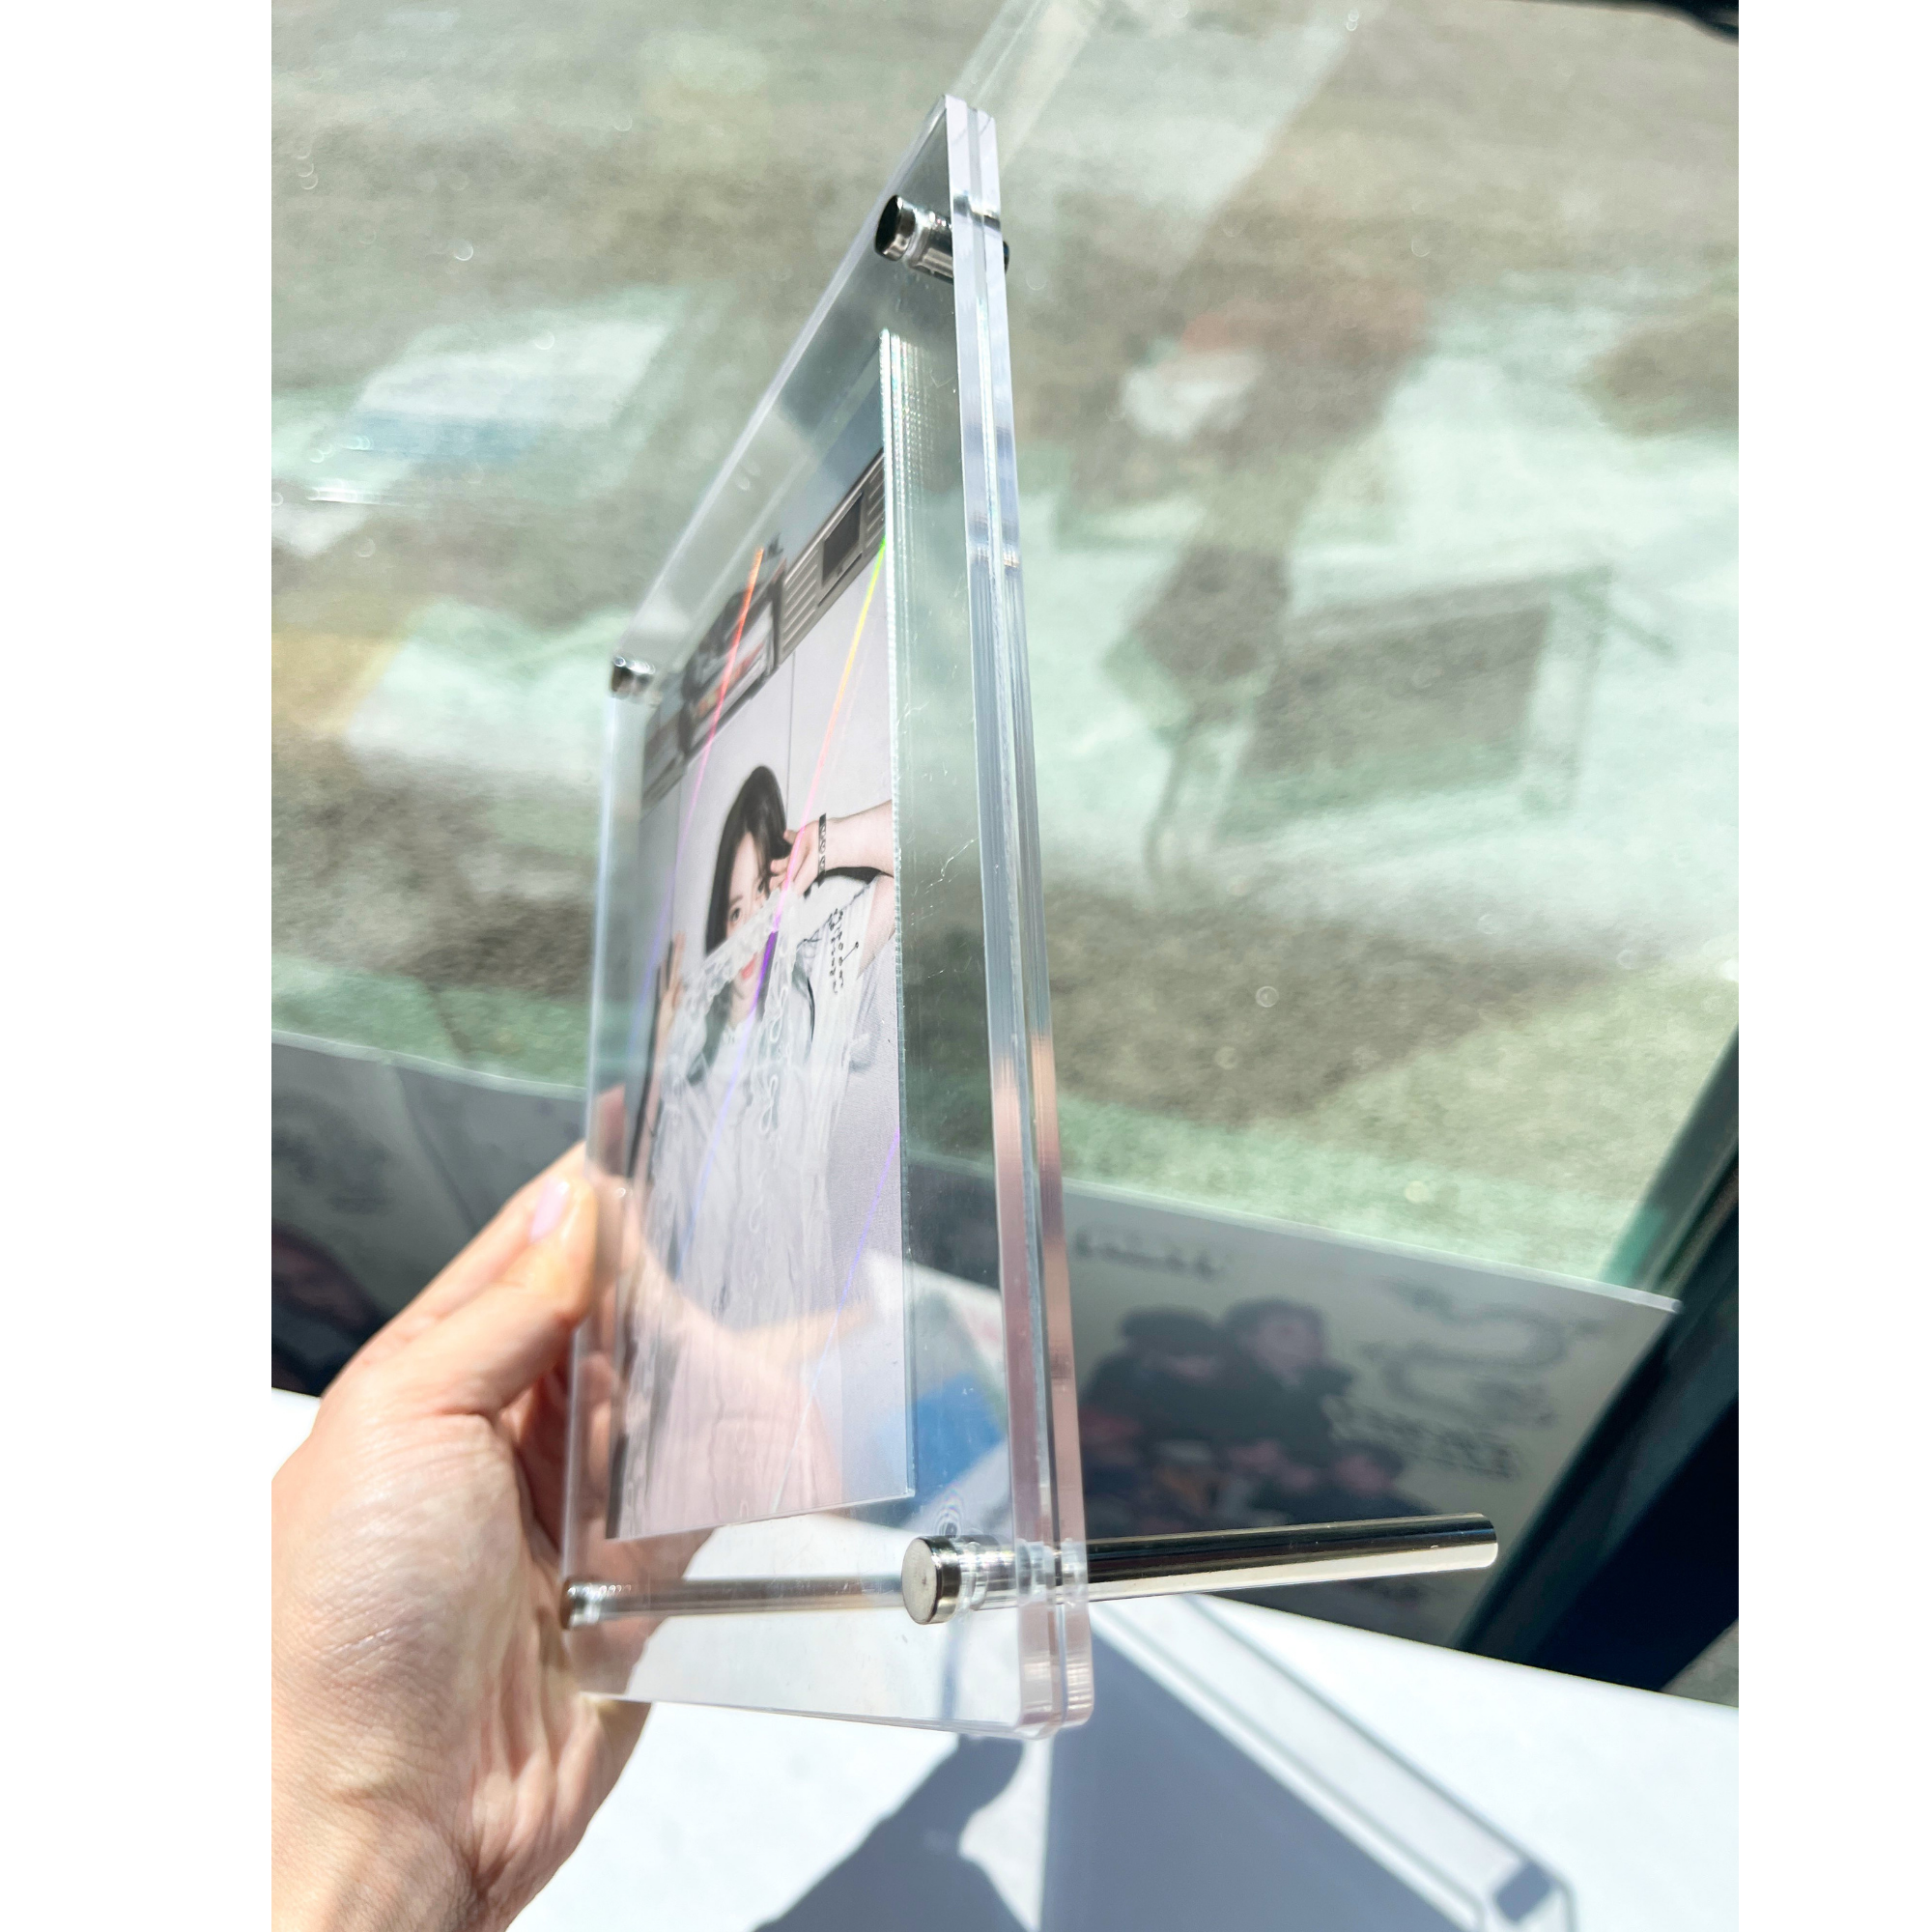 K-KEEP Acrylic Display Frame - [1 Postcard Frame] Slot Size 105x155MM Fit Postcard with 103x153MM or 104x105MM Sleeve